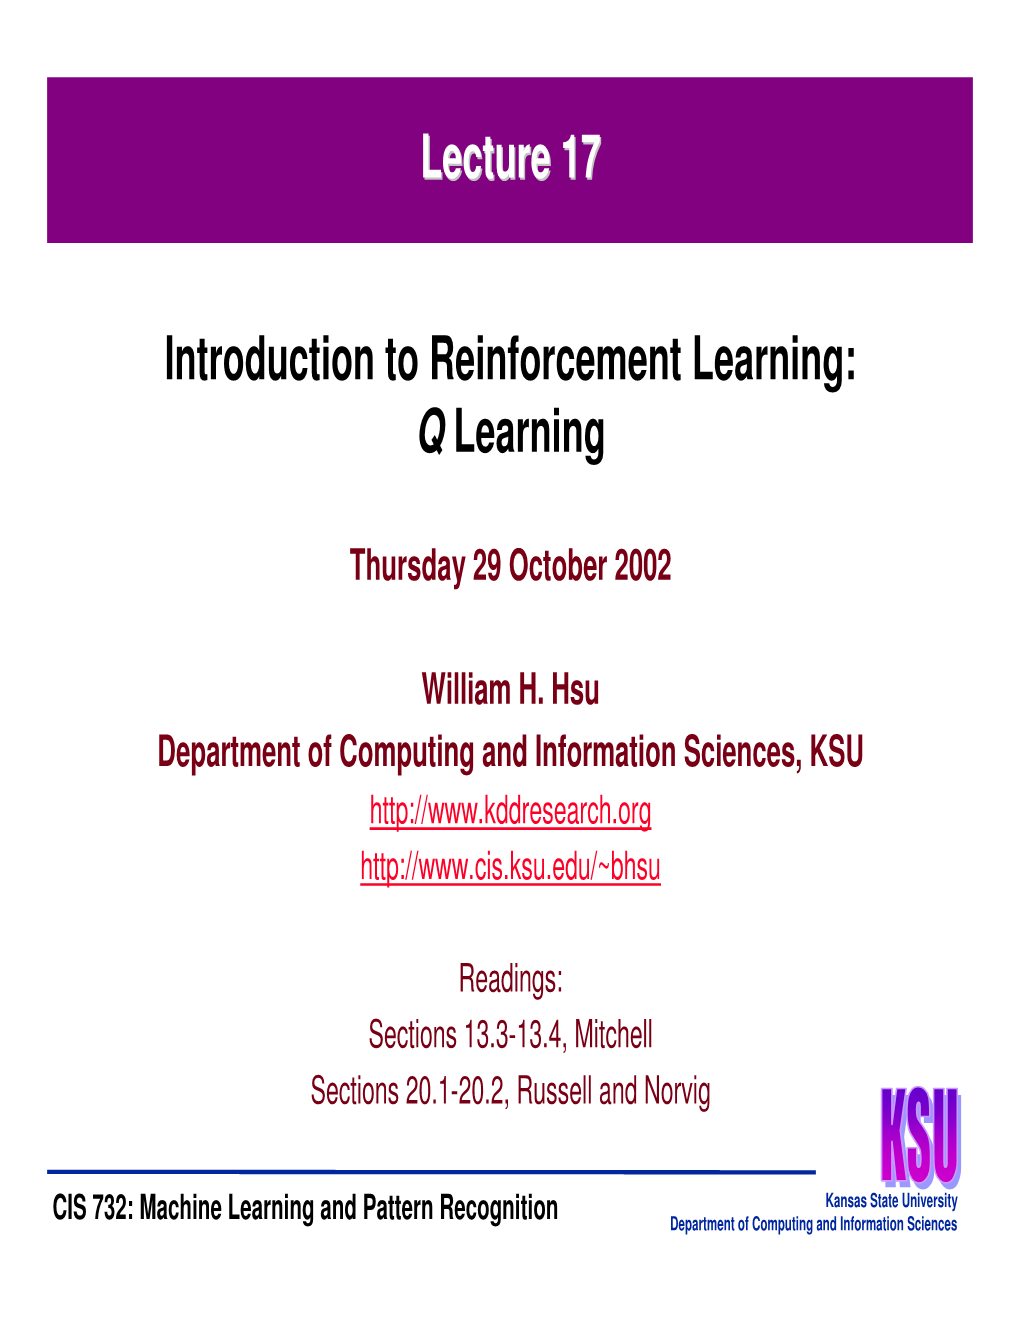 Introduction to Reinforcement Learning: Q Learning Lecture 17